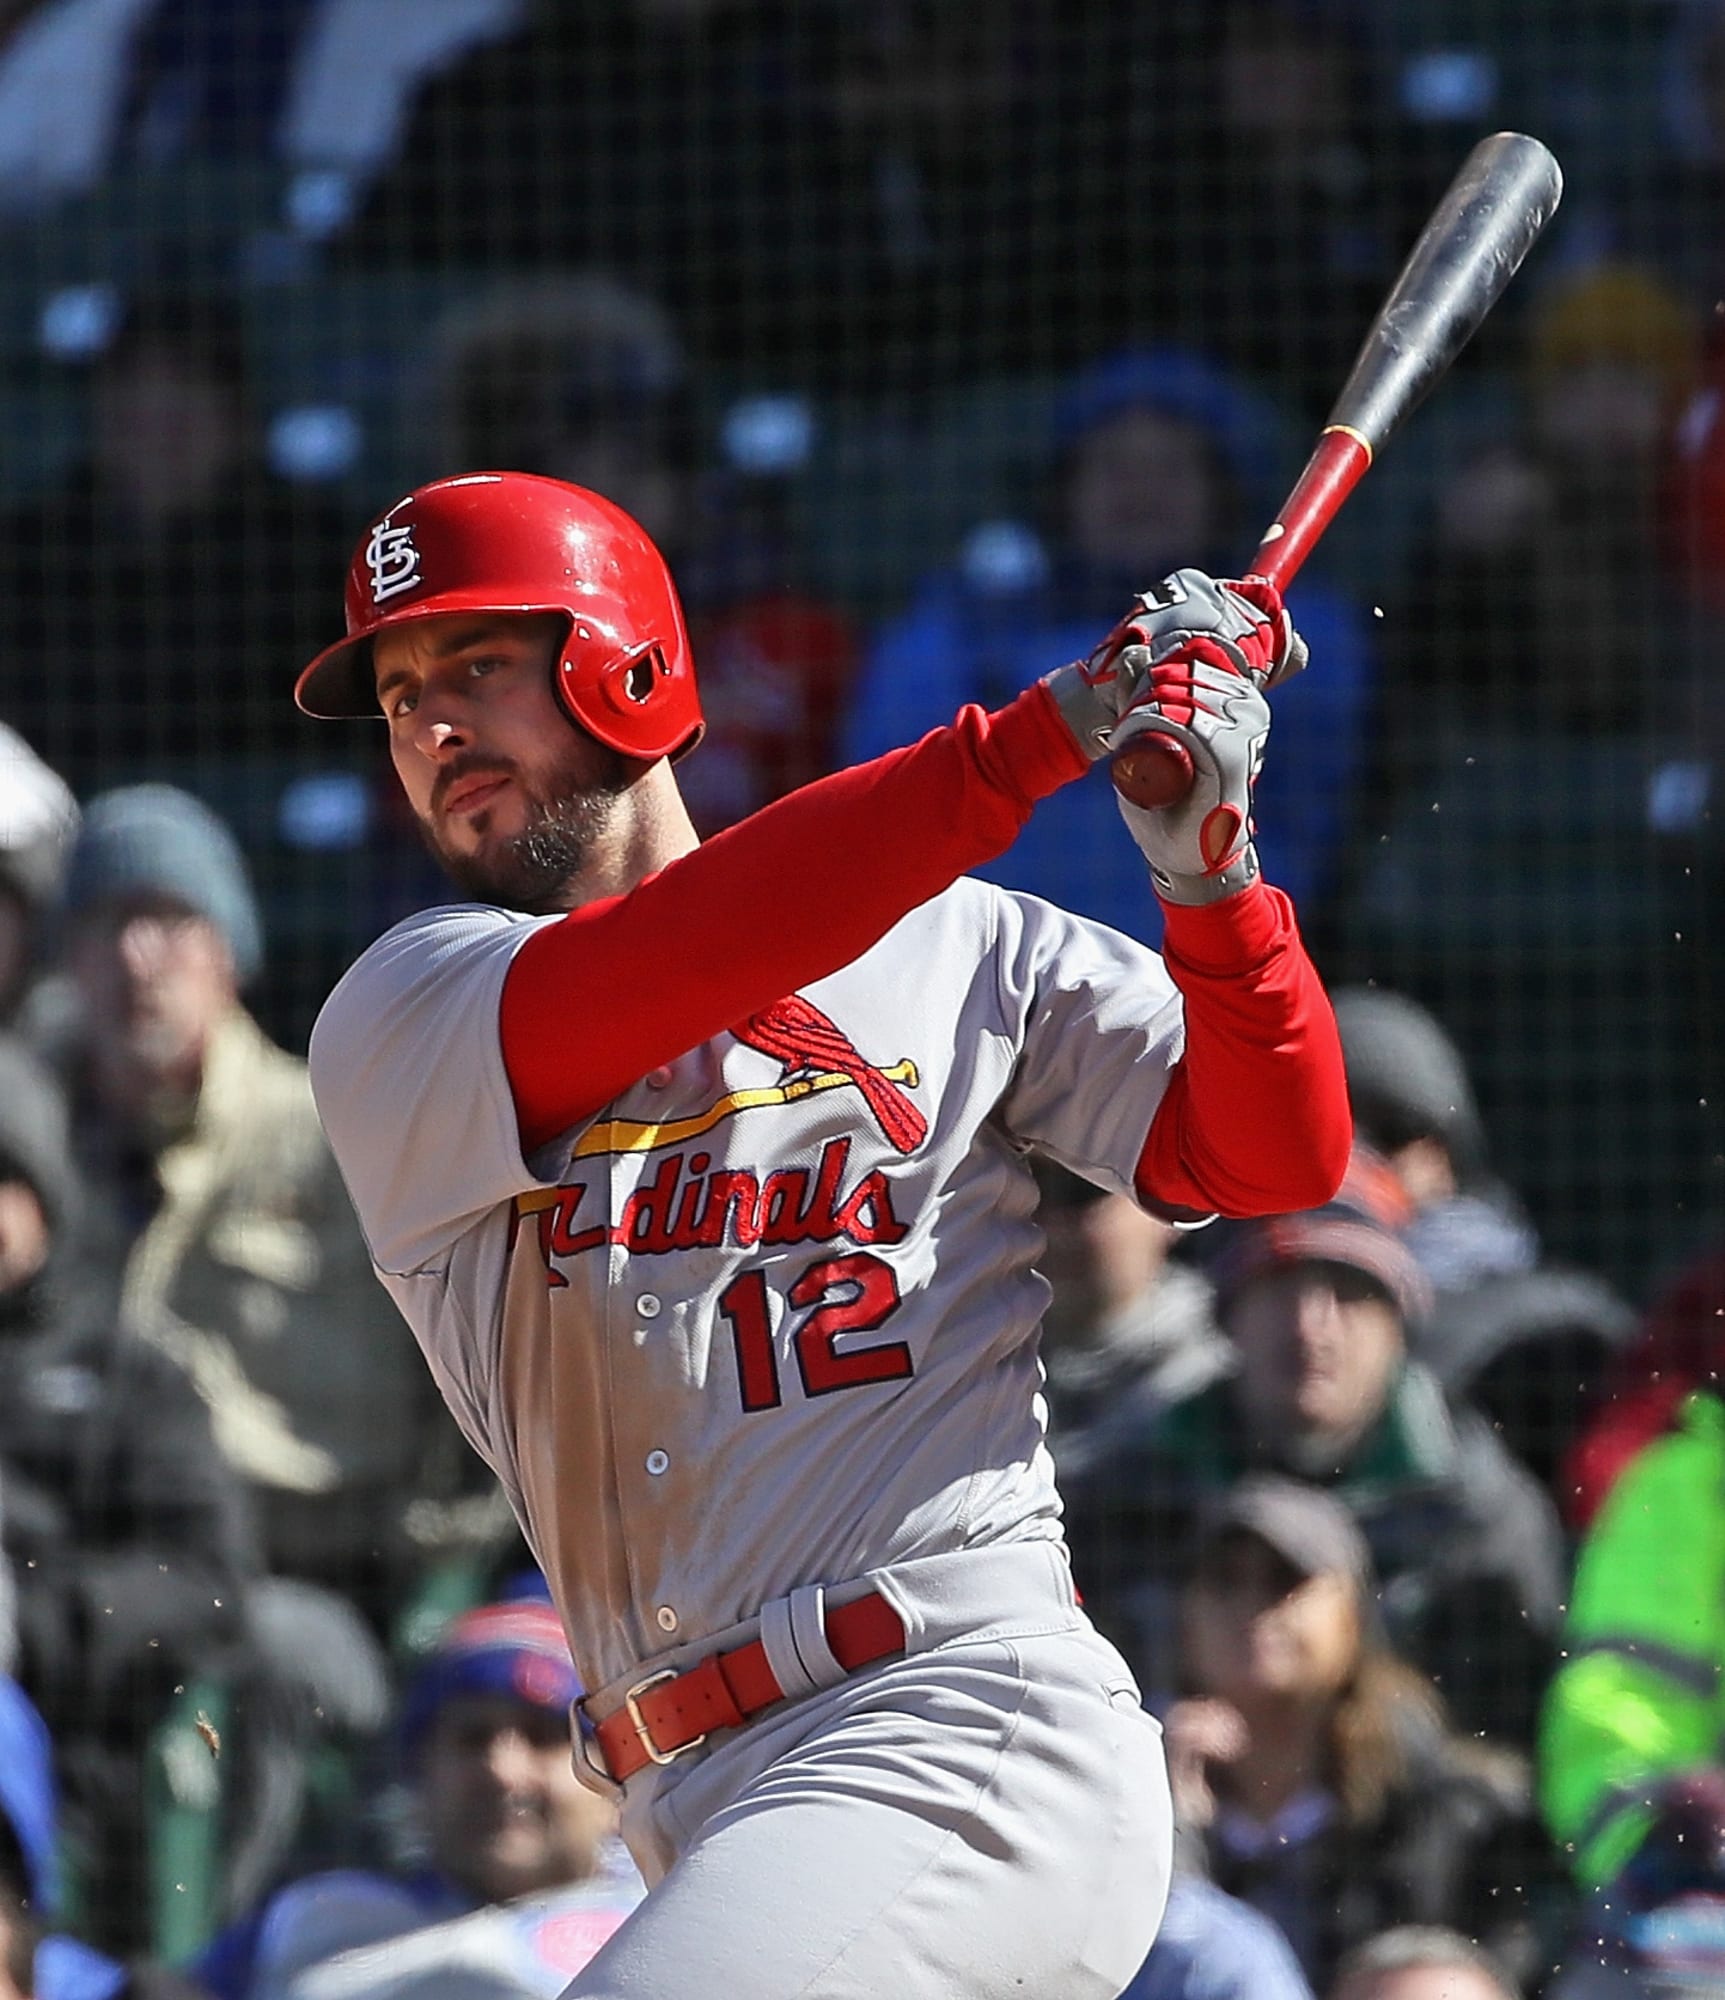 St. Louis Cardinals: DeJong and Bowman are the latest Cardinal casualties